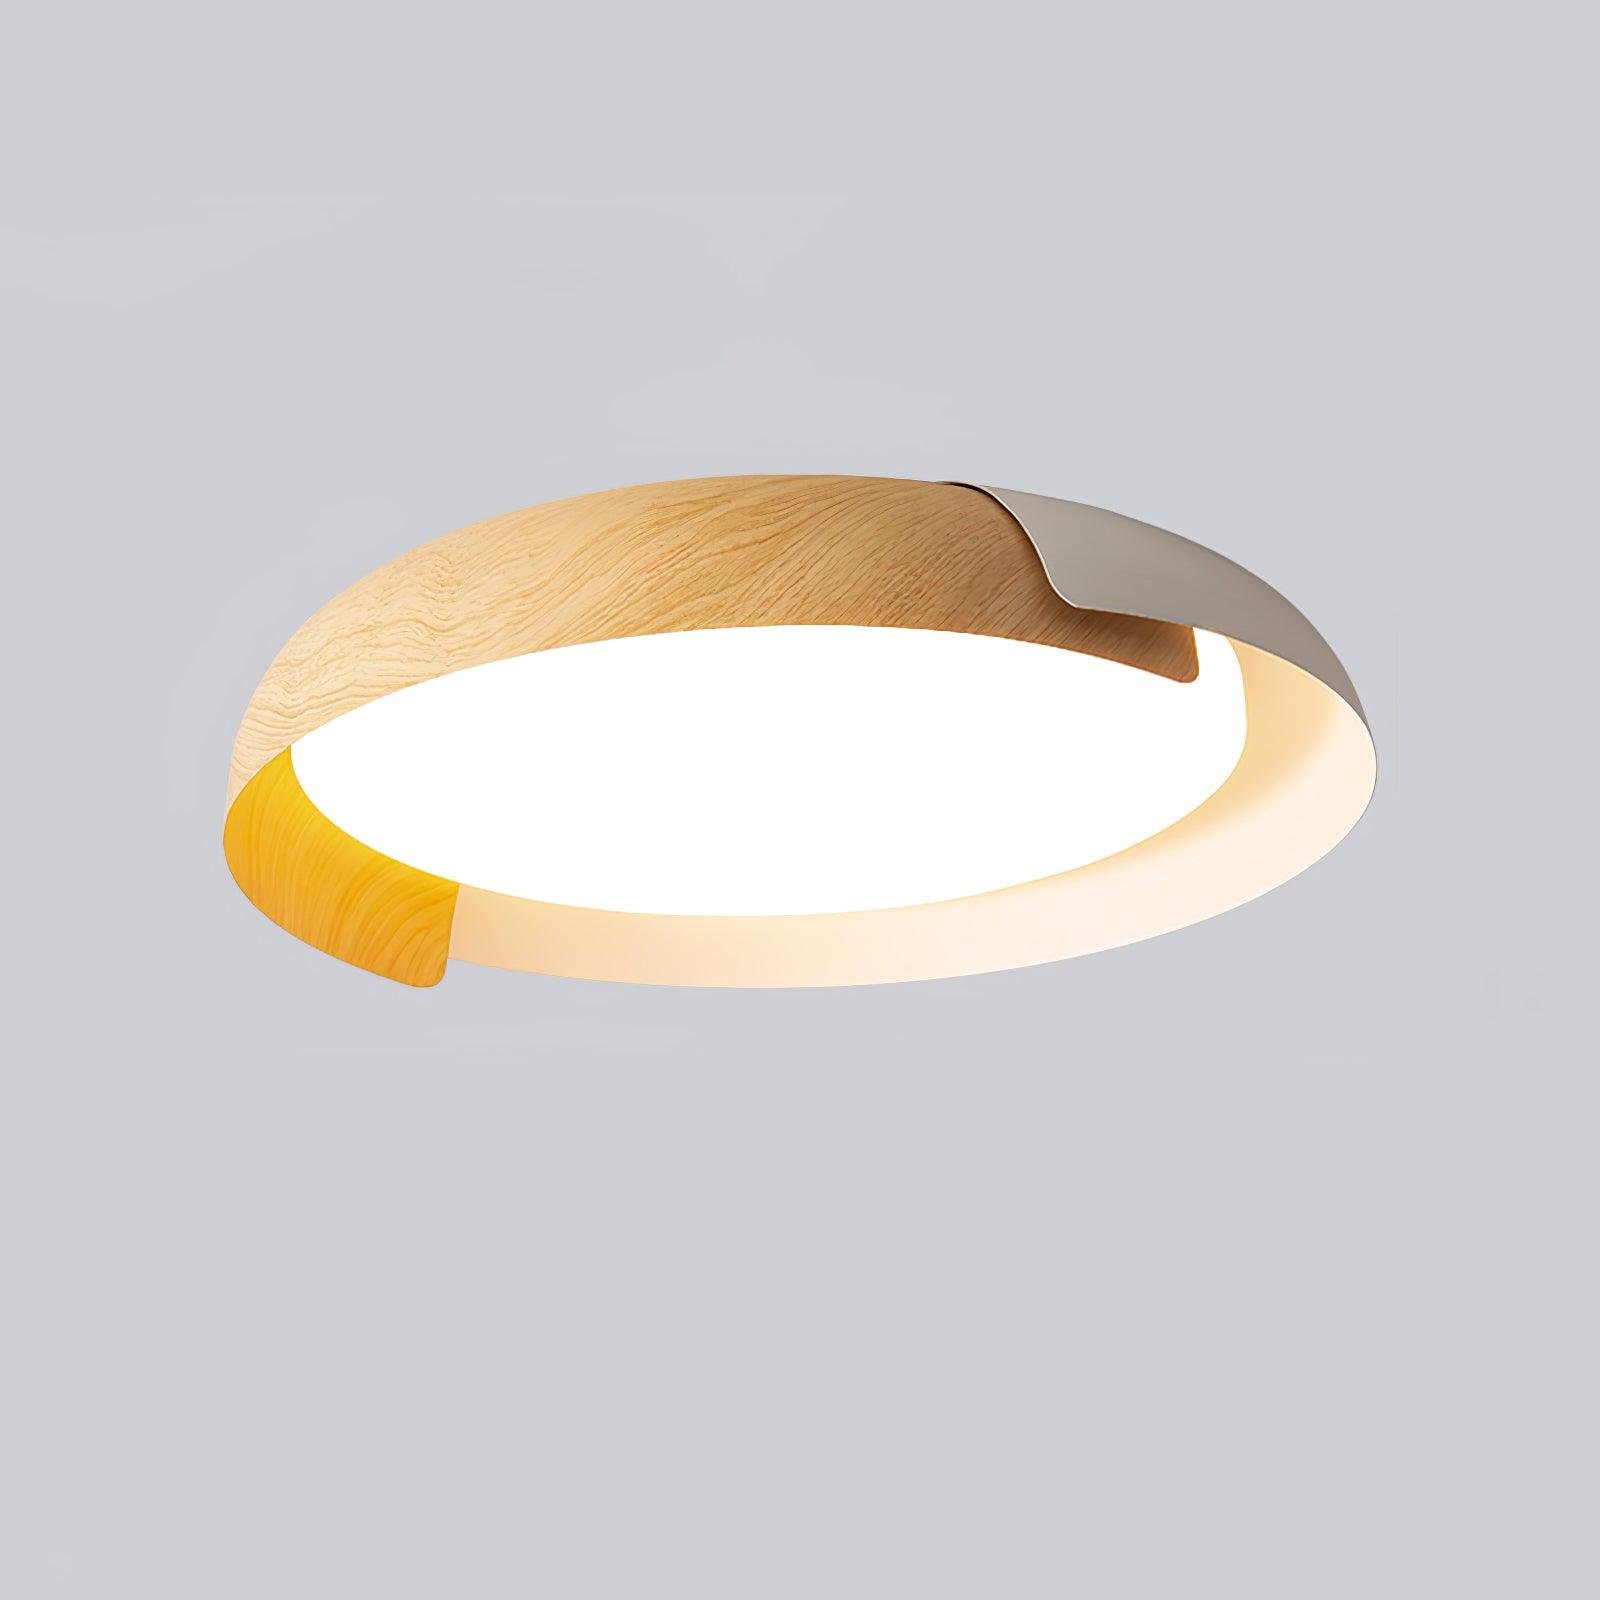 Ceiling Light - Vikaey, White Color with Light Wood Elements, Cool Light, Dimensions: Diameter 22 inches x Height 3.9 inches (56cm x 10cm)